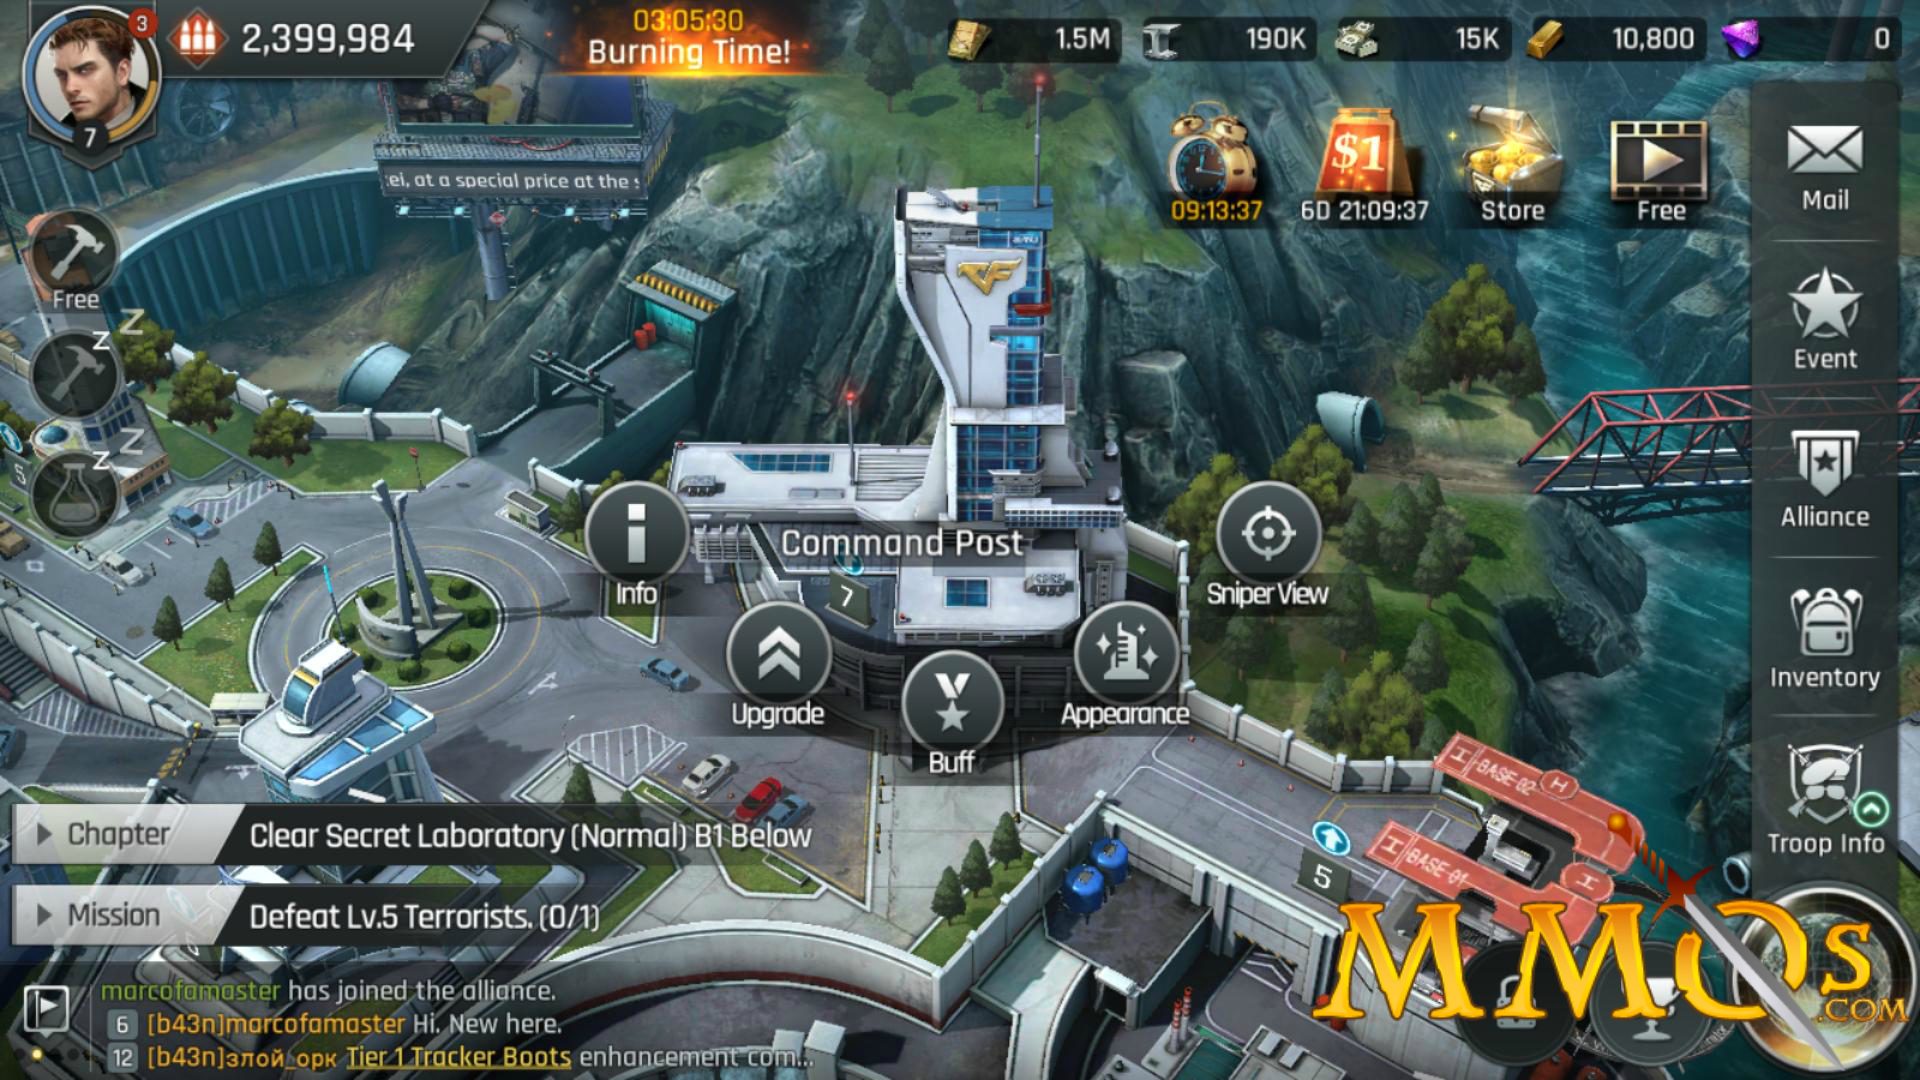 Call of War free-to-play MMORTS for PC and mobile devices here on F2P